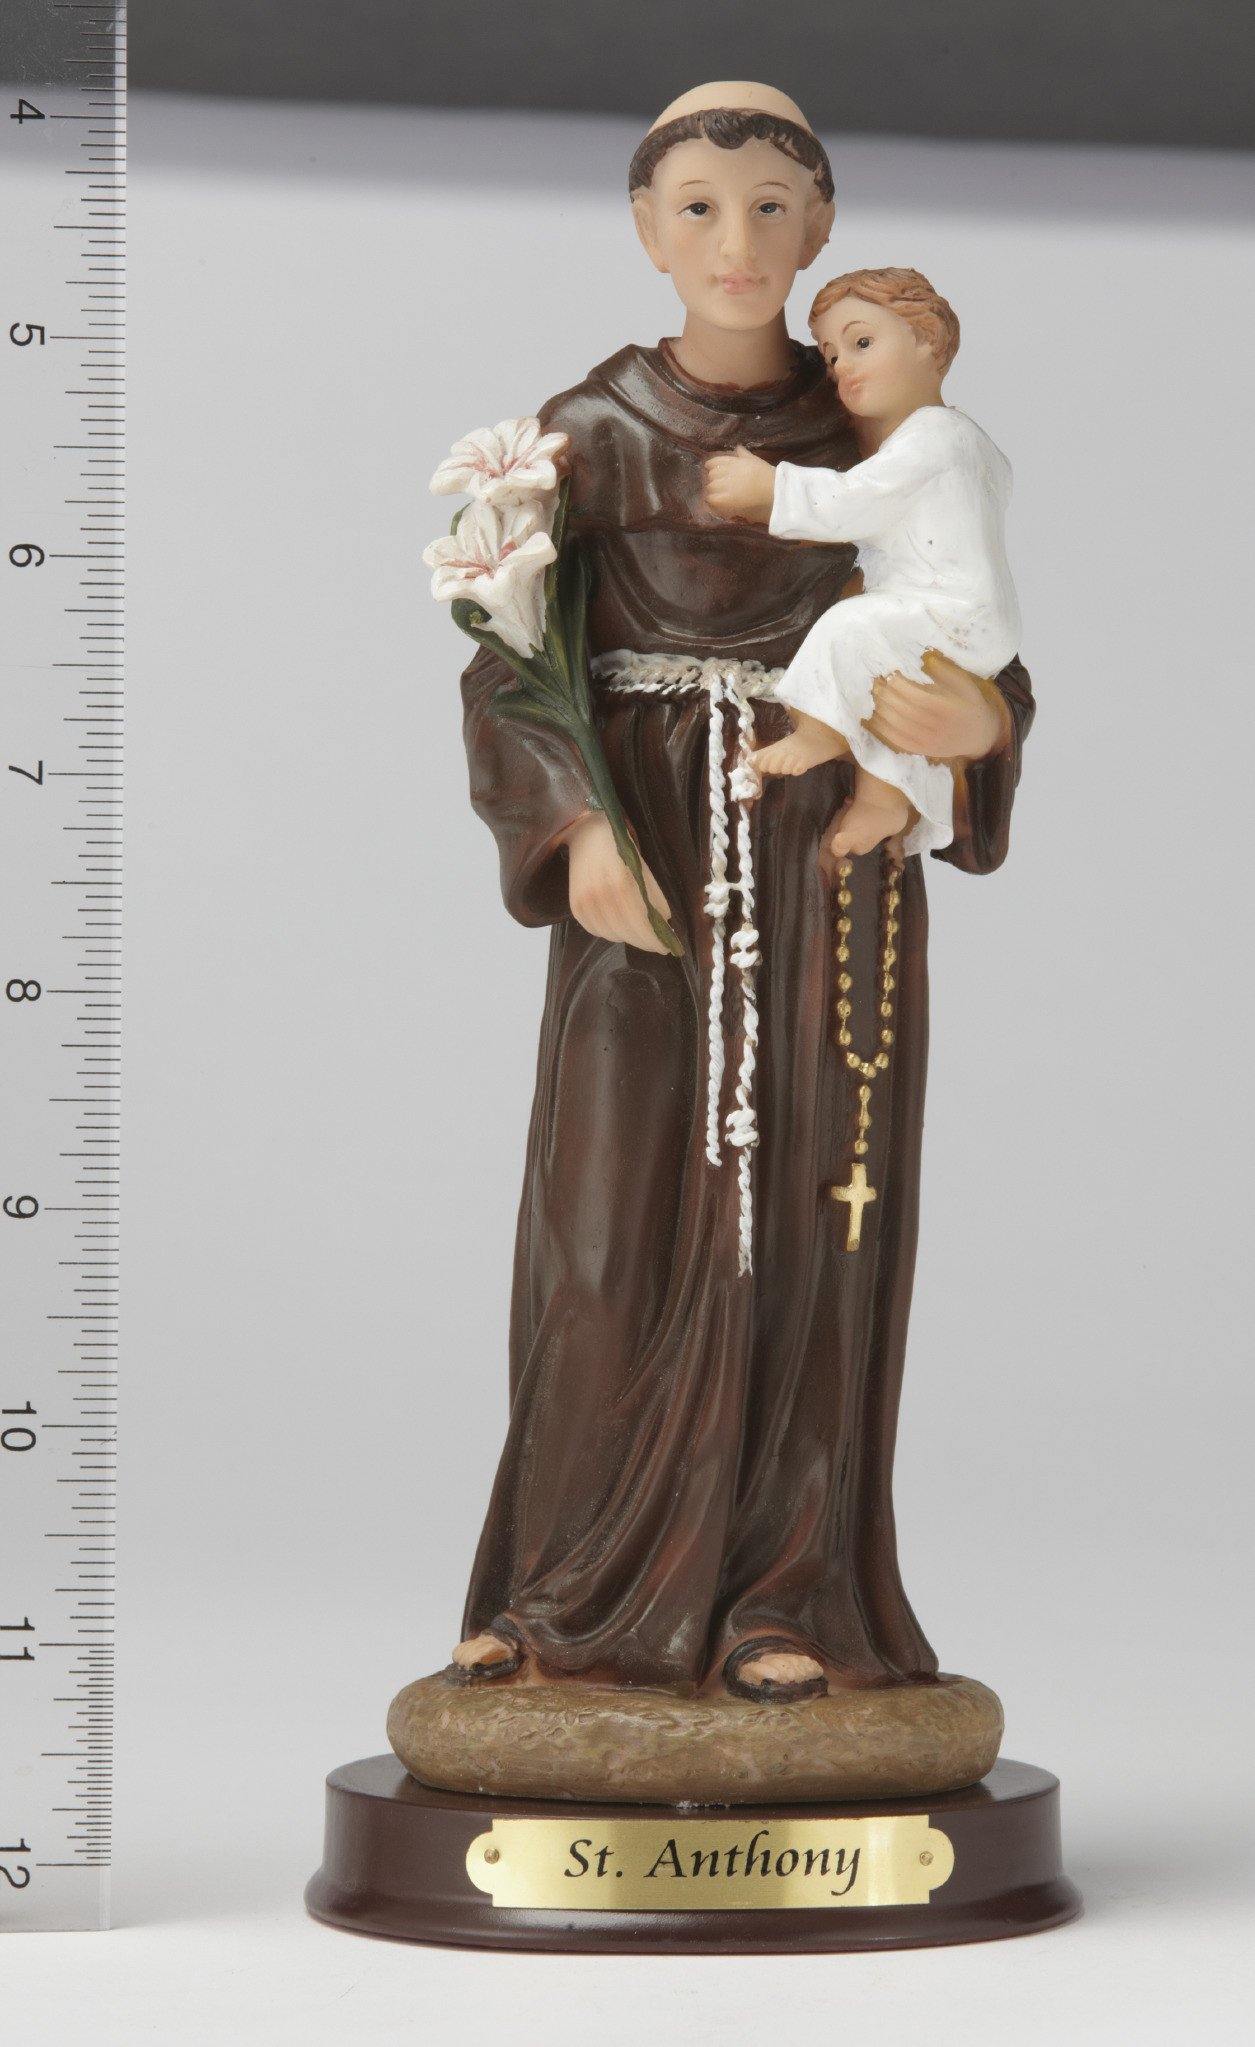 8" St. Anthony Statue - Hand Painted - Religious Art - Chiarelli's Religious Goods & Church Supply